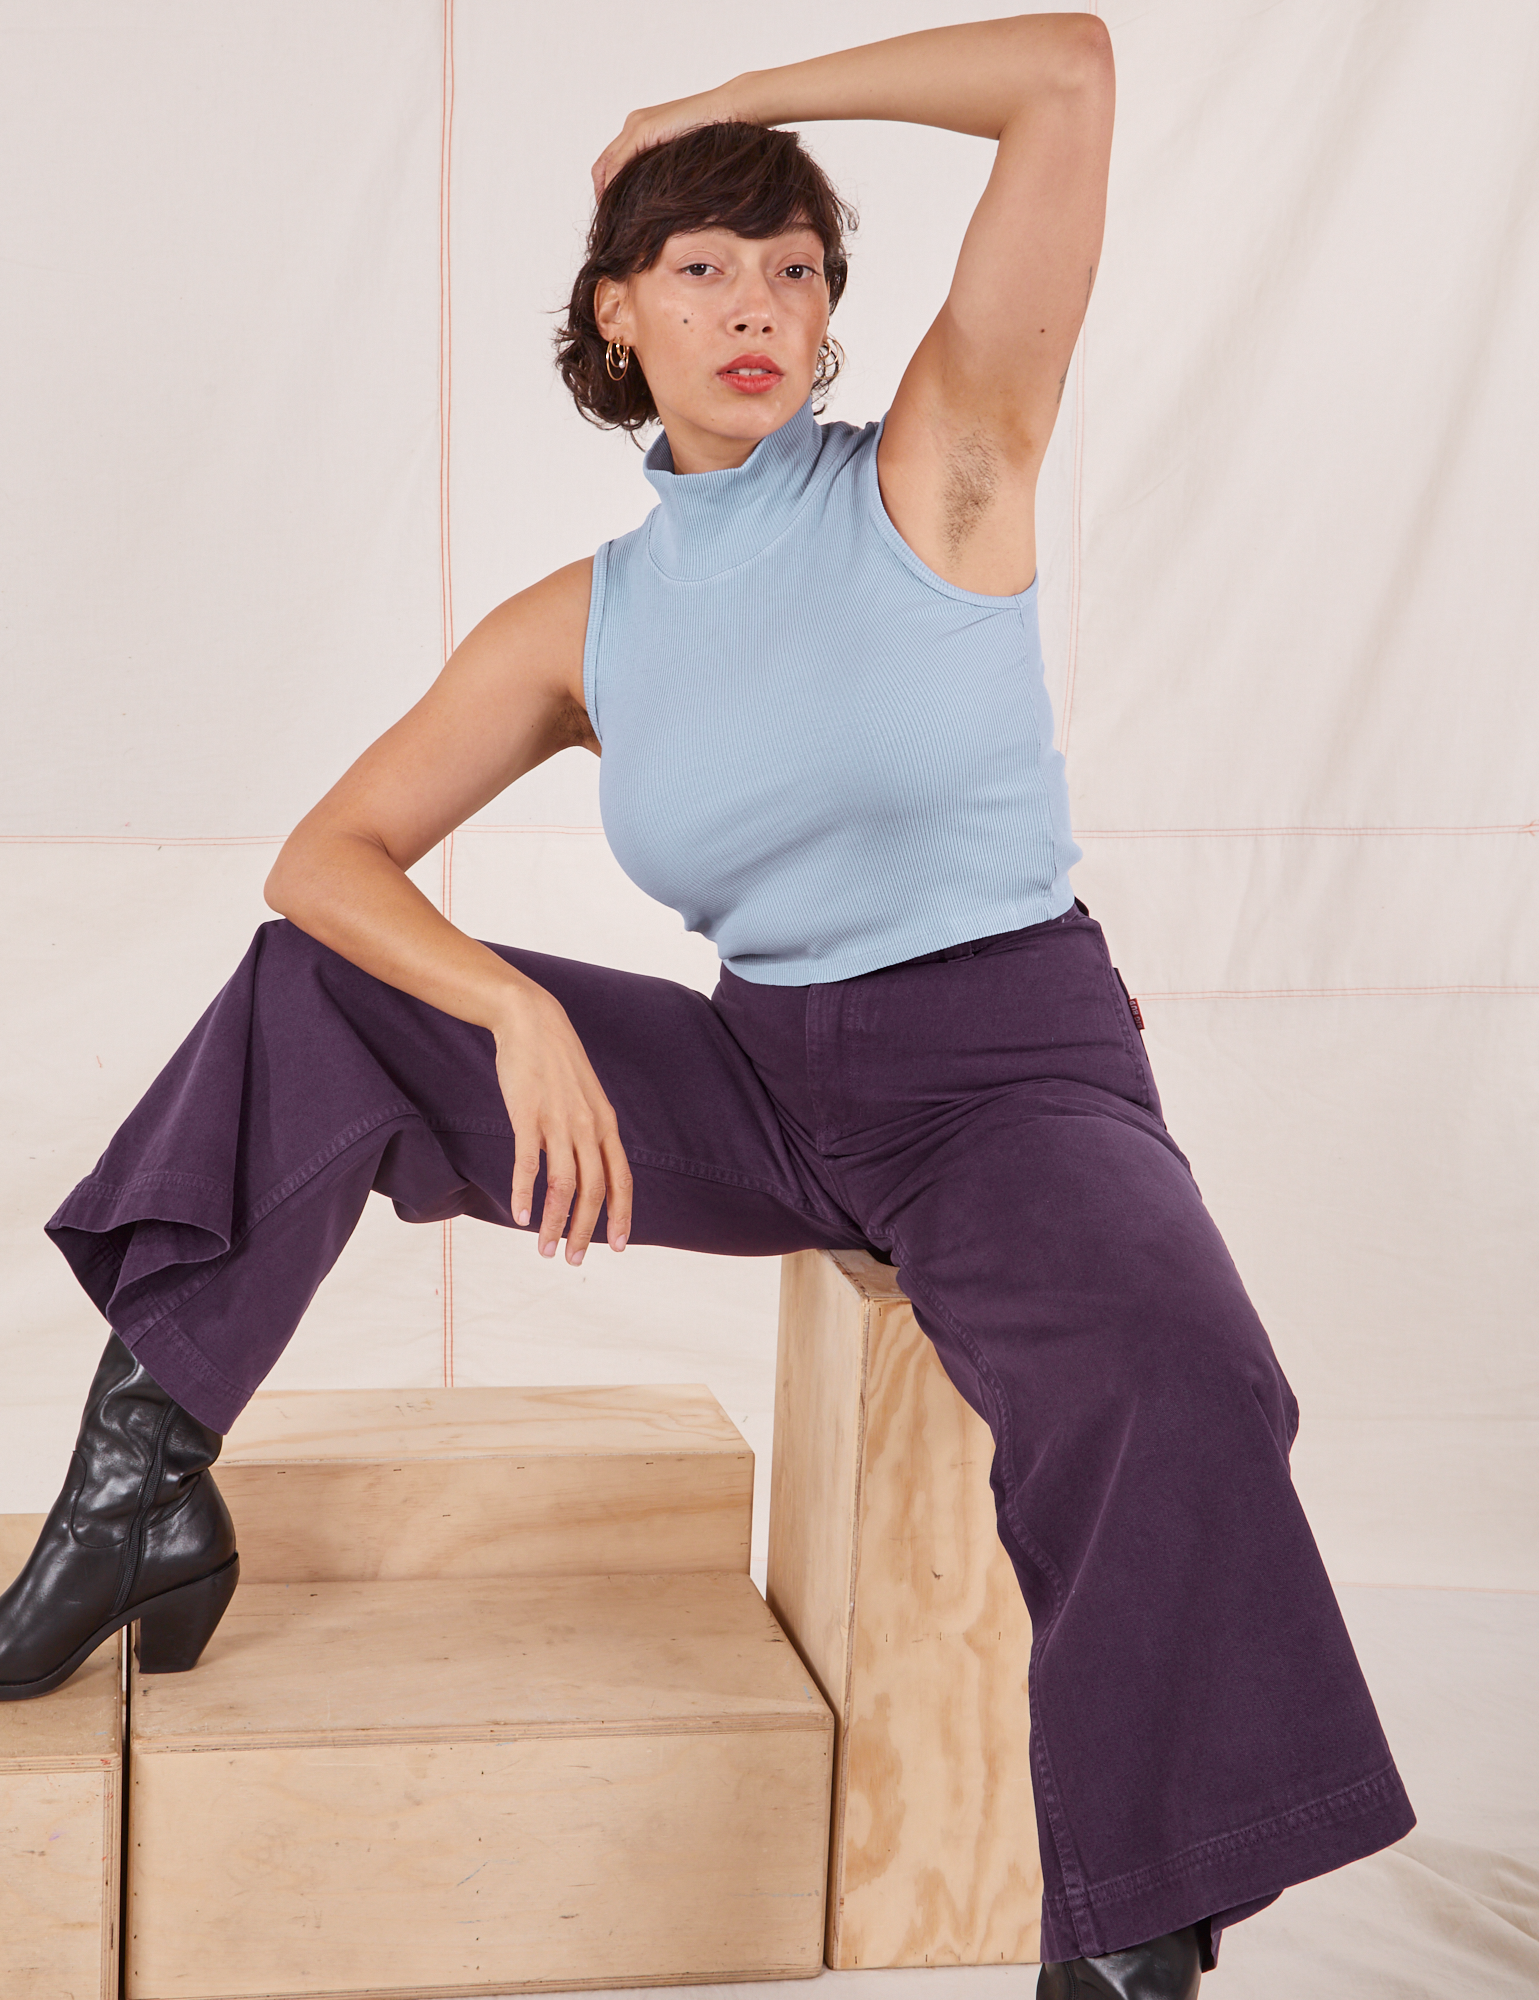 Tiara is wearing Sleeveless Essential Turtleneck in Periwinkle and nebula purple Bell Bottoms